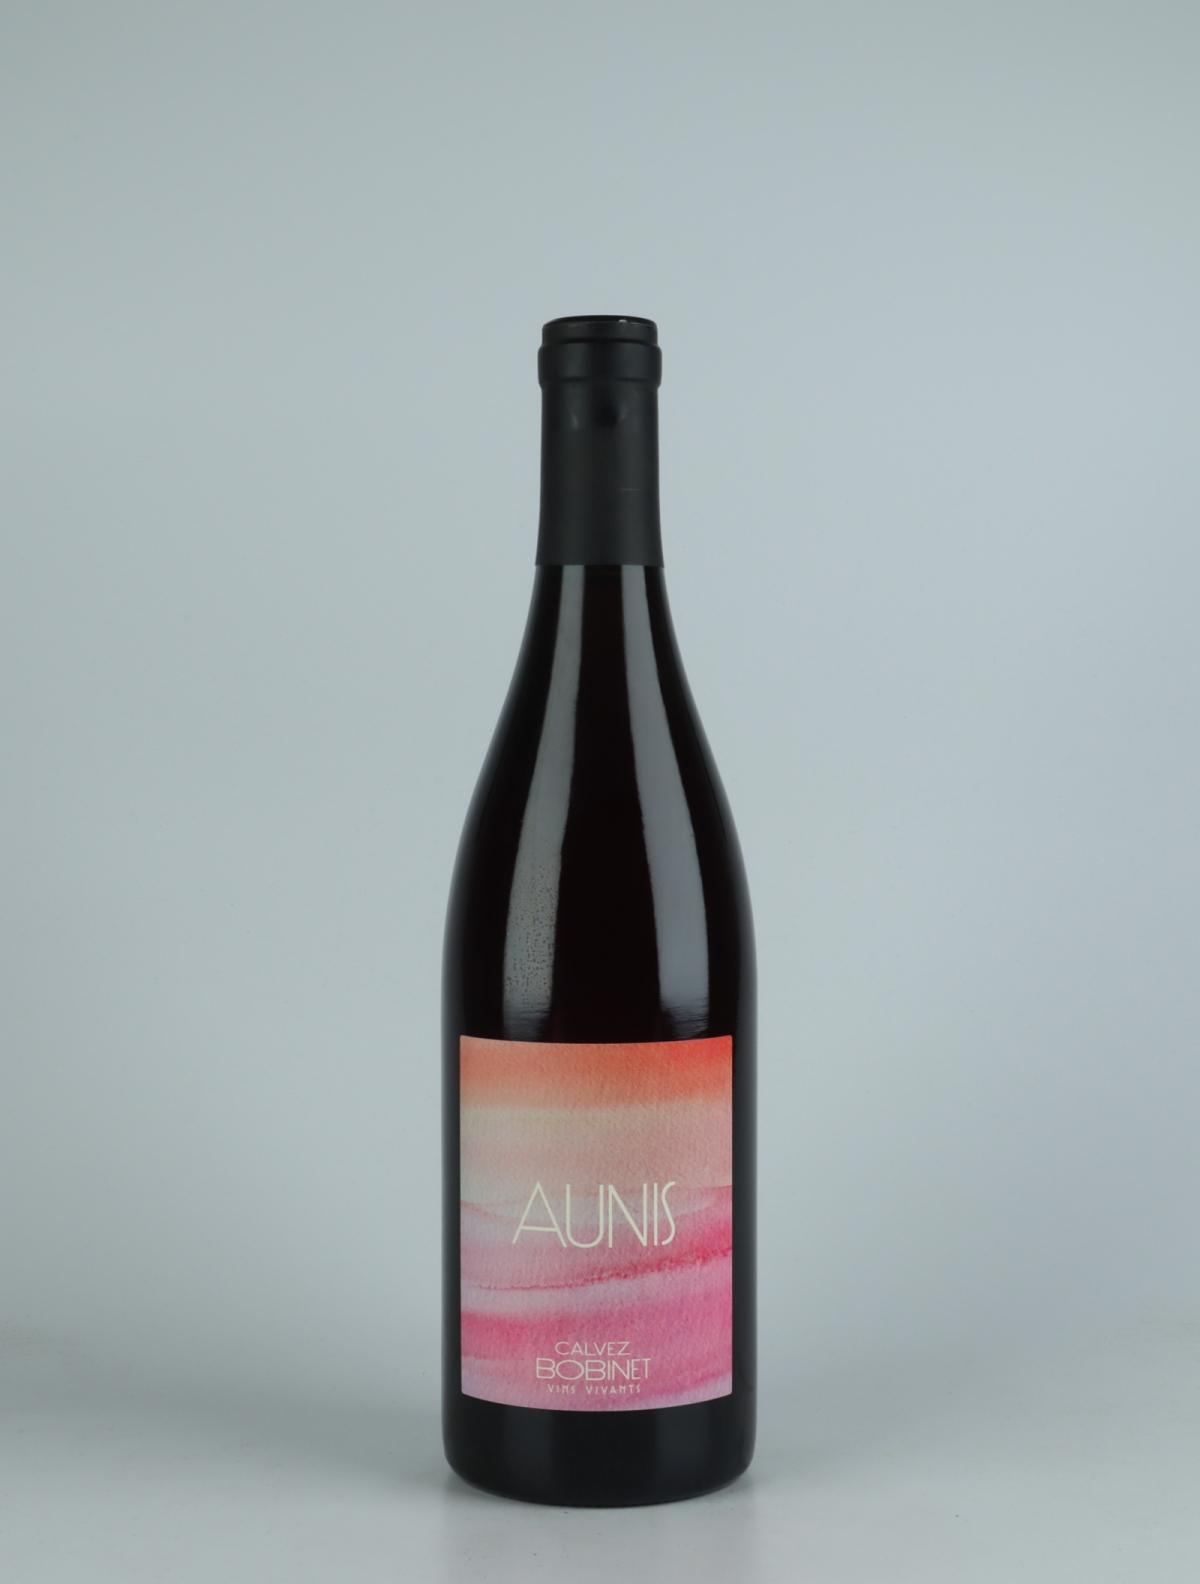 A bottle 2021 Aunis Red wine from Domaine Bobinet, Loire in France